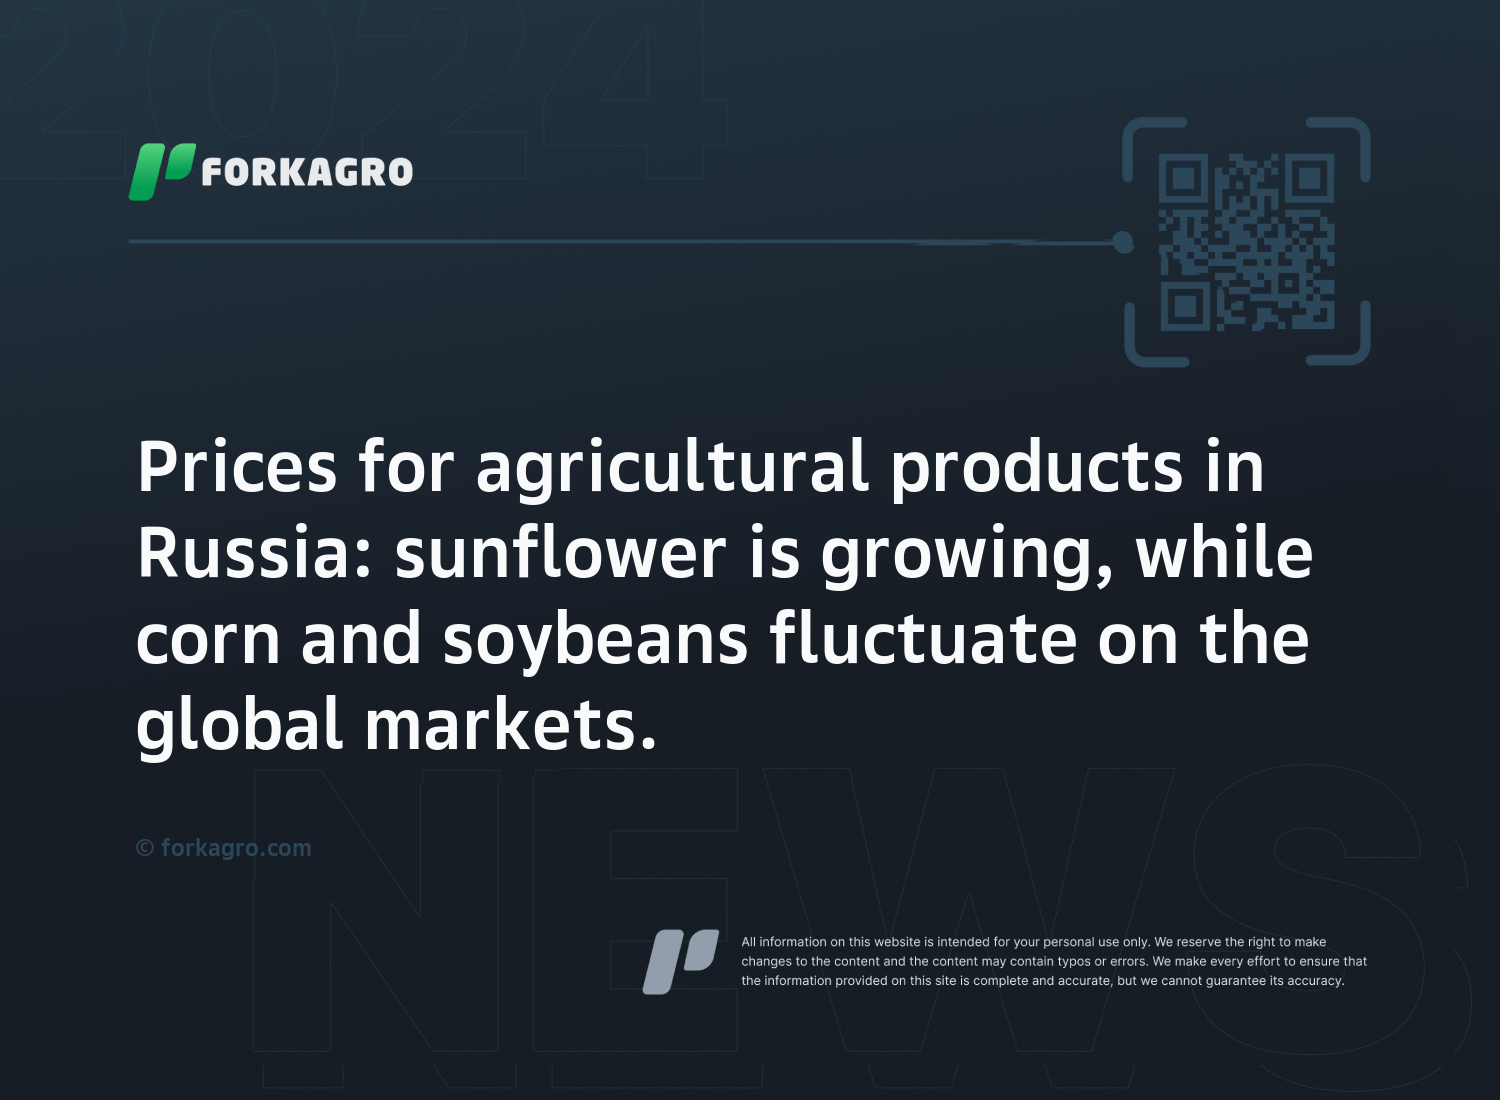 Prices for agricultural products in Russia: sunflower is growing, while corn and soybeans fluctuate on the global markets.